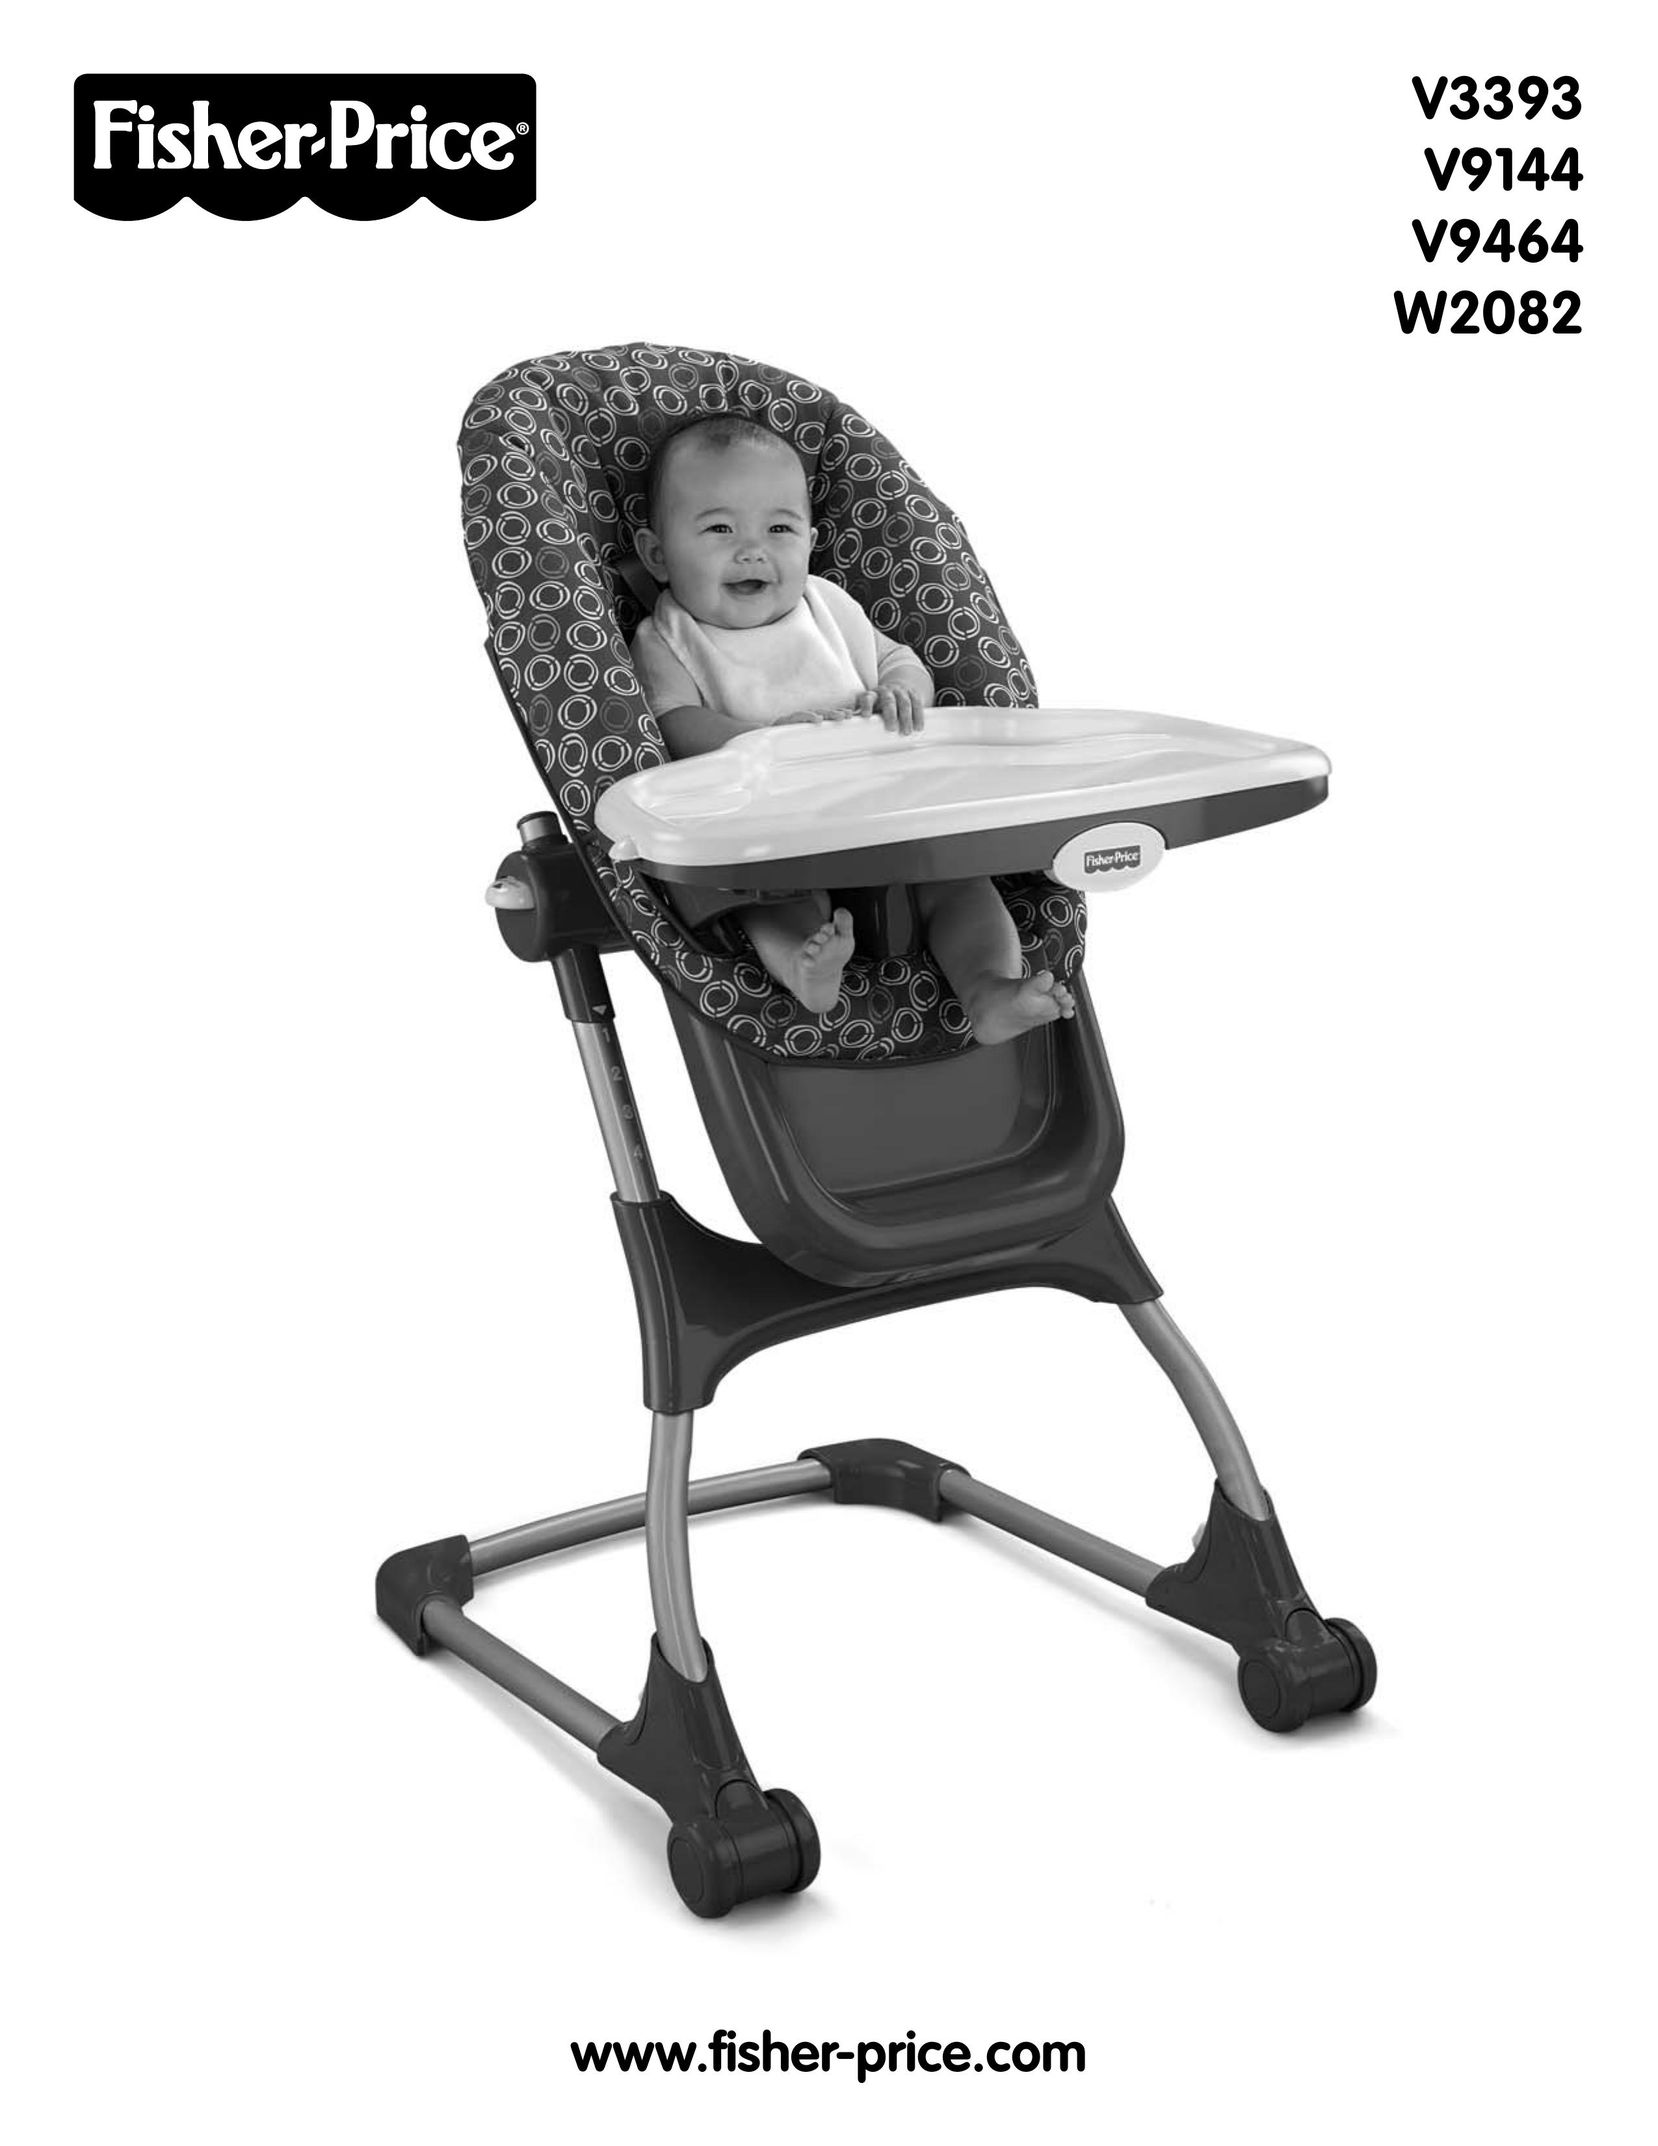 Fisher-Price W2082 High Chair User Manual